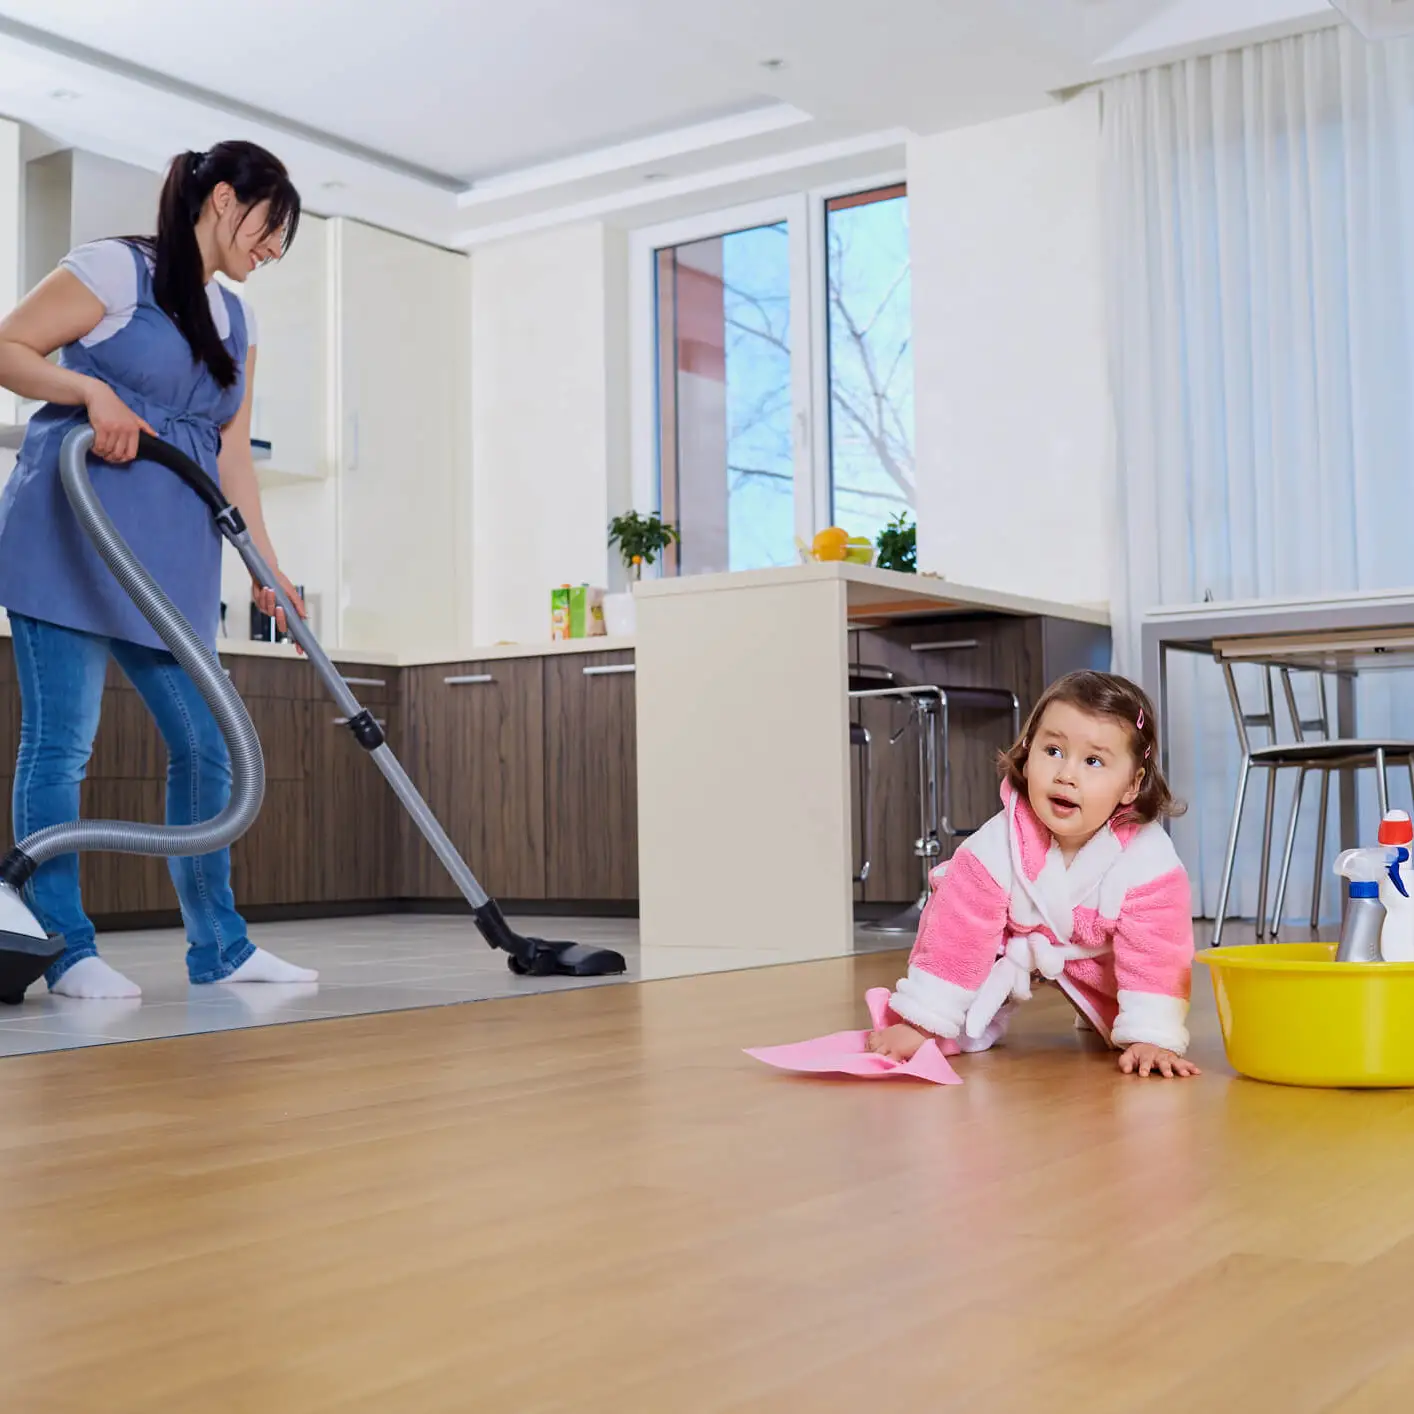 Best Spring Offer Cleaning Company in Dubai